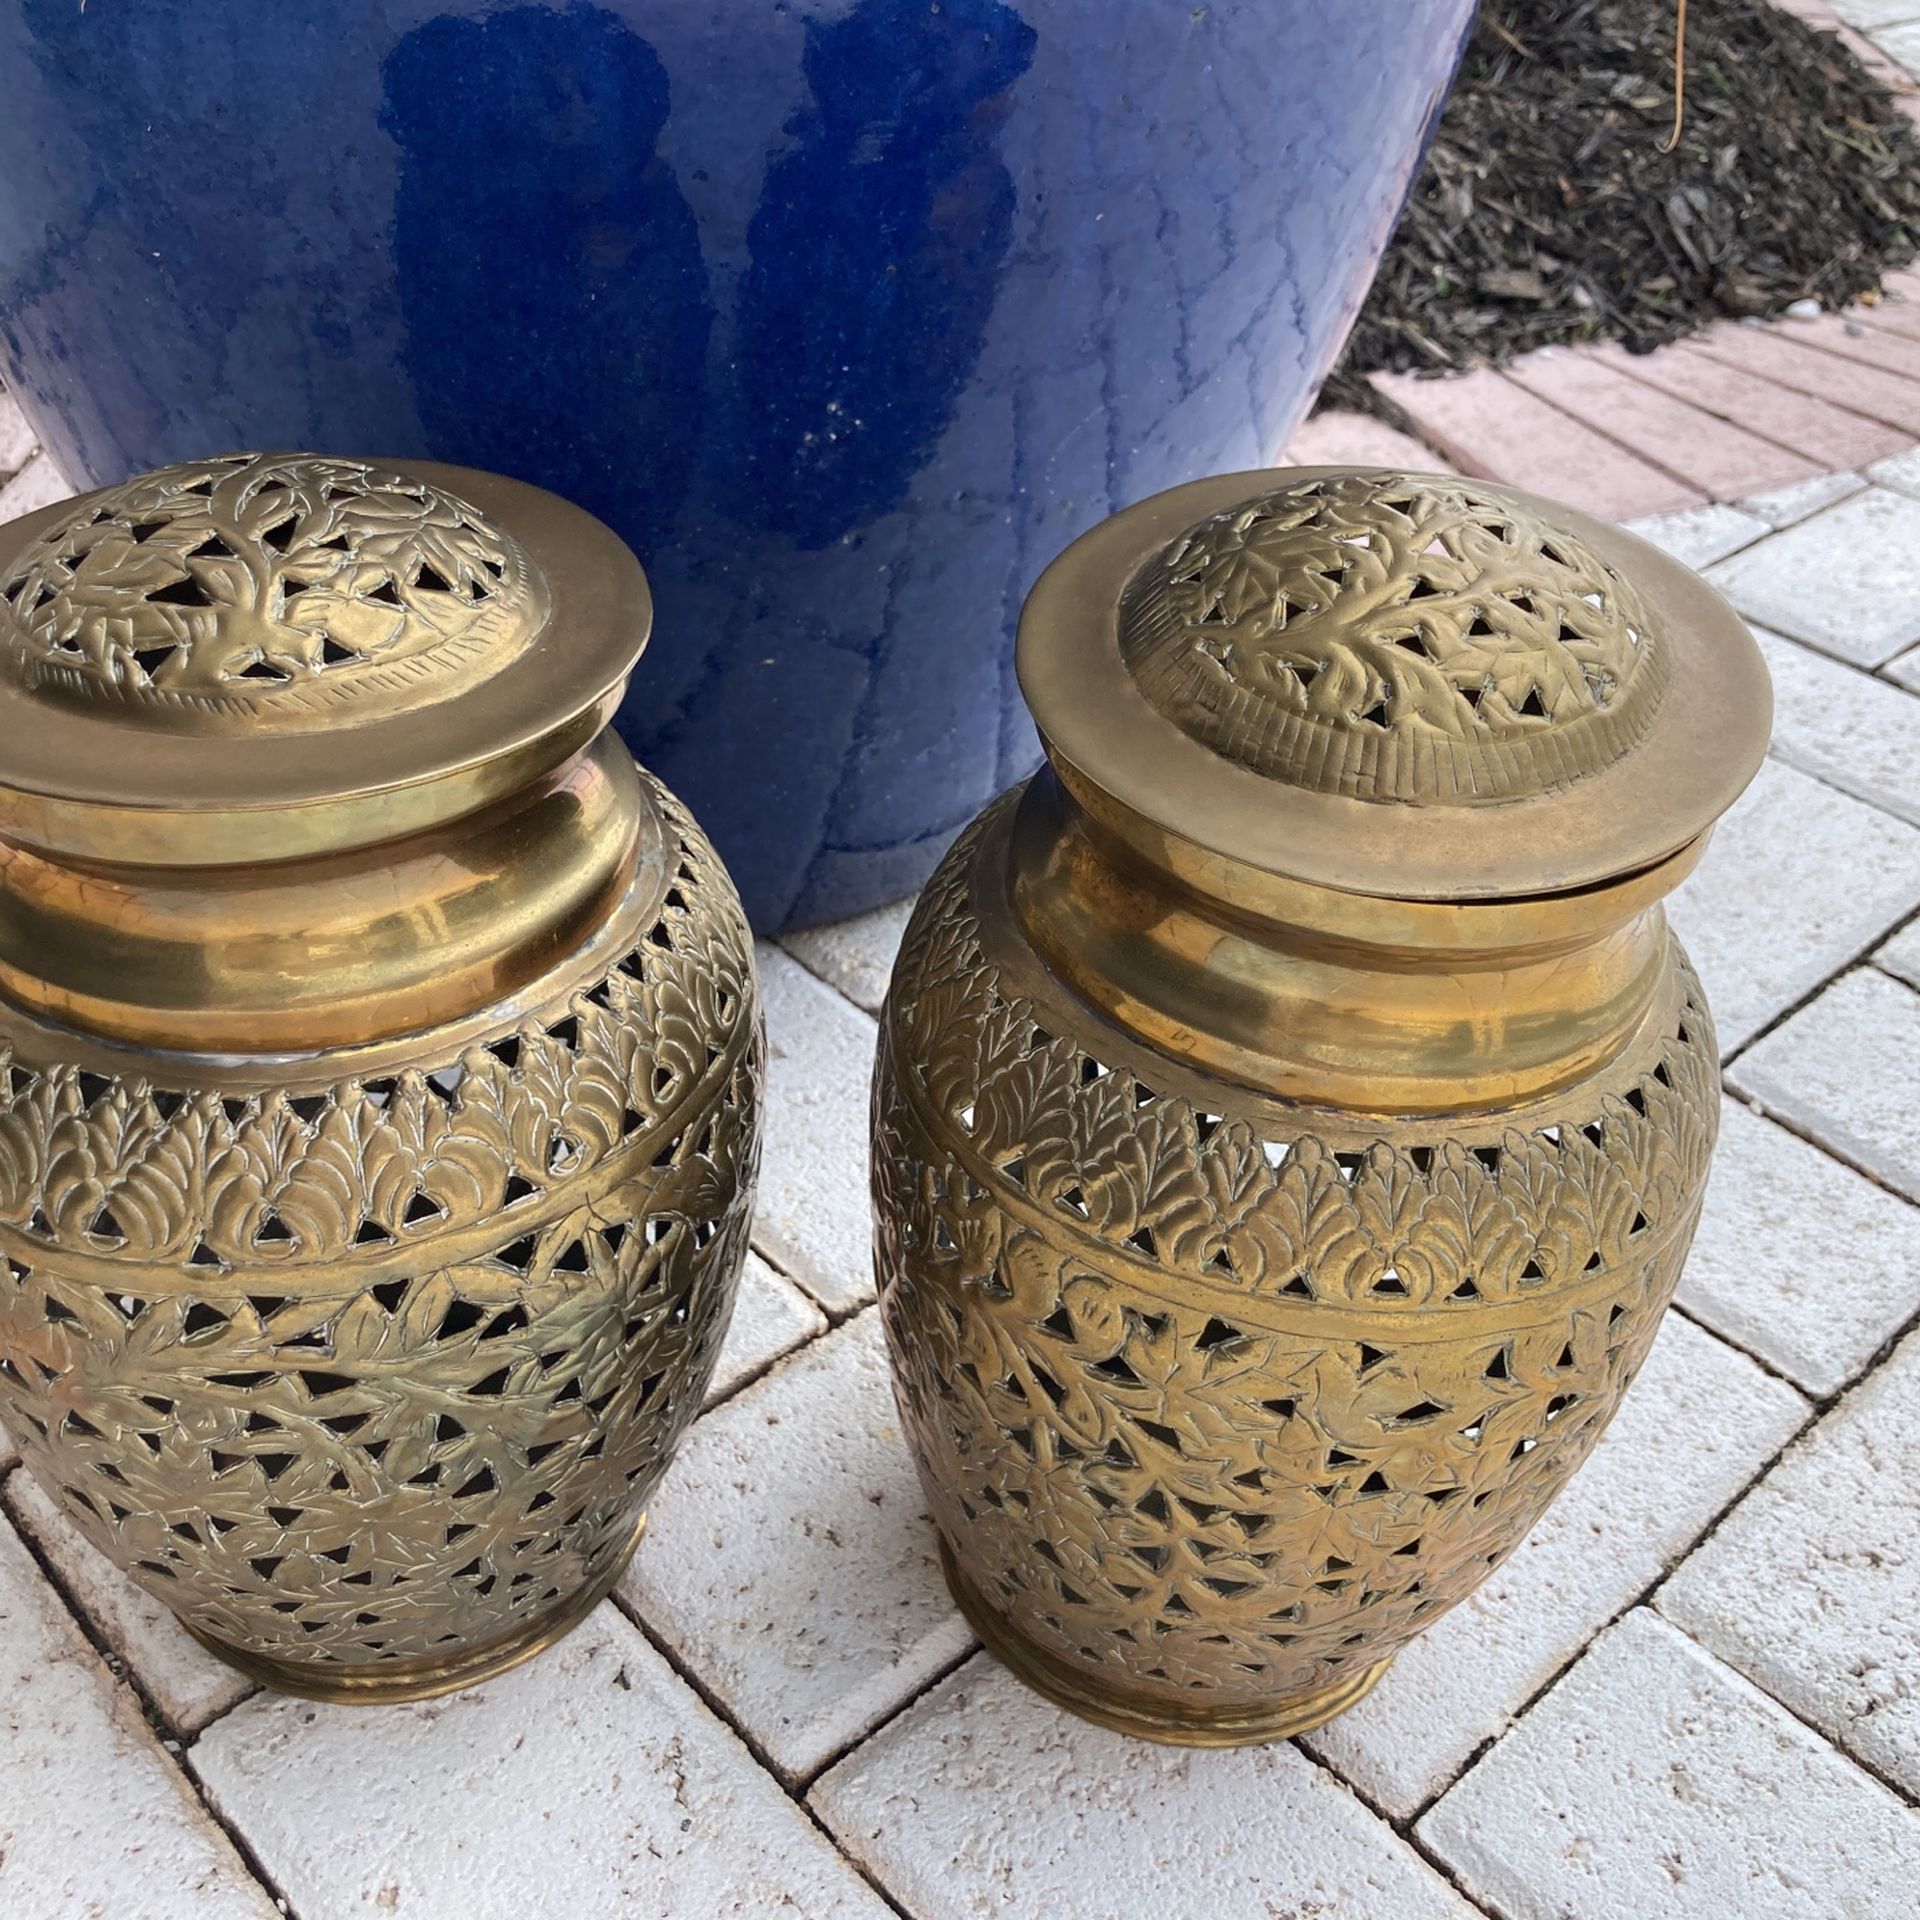 2 Antique Vintage 11” Brass Asian Indian Chinoiserie Ginger Jars $50 PAIR.  Reclining Neoclassical Cleopatra Statue $35.